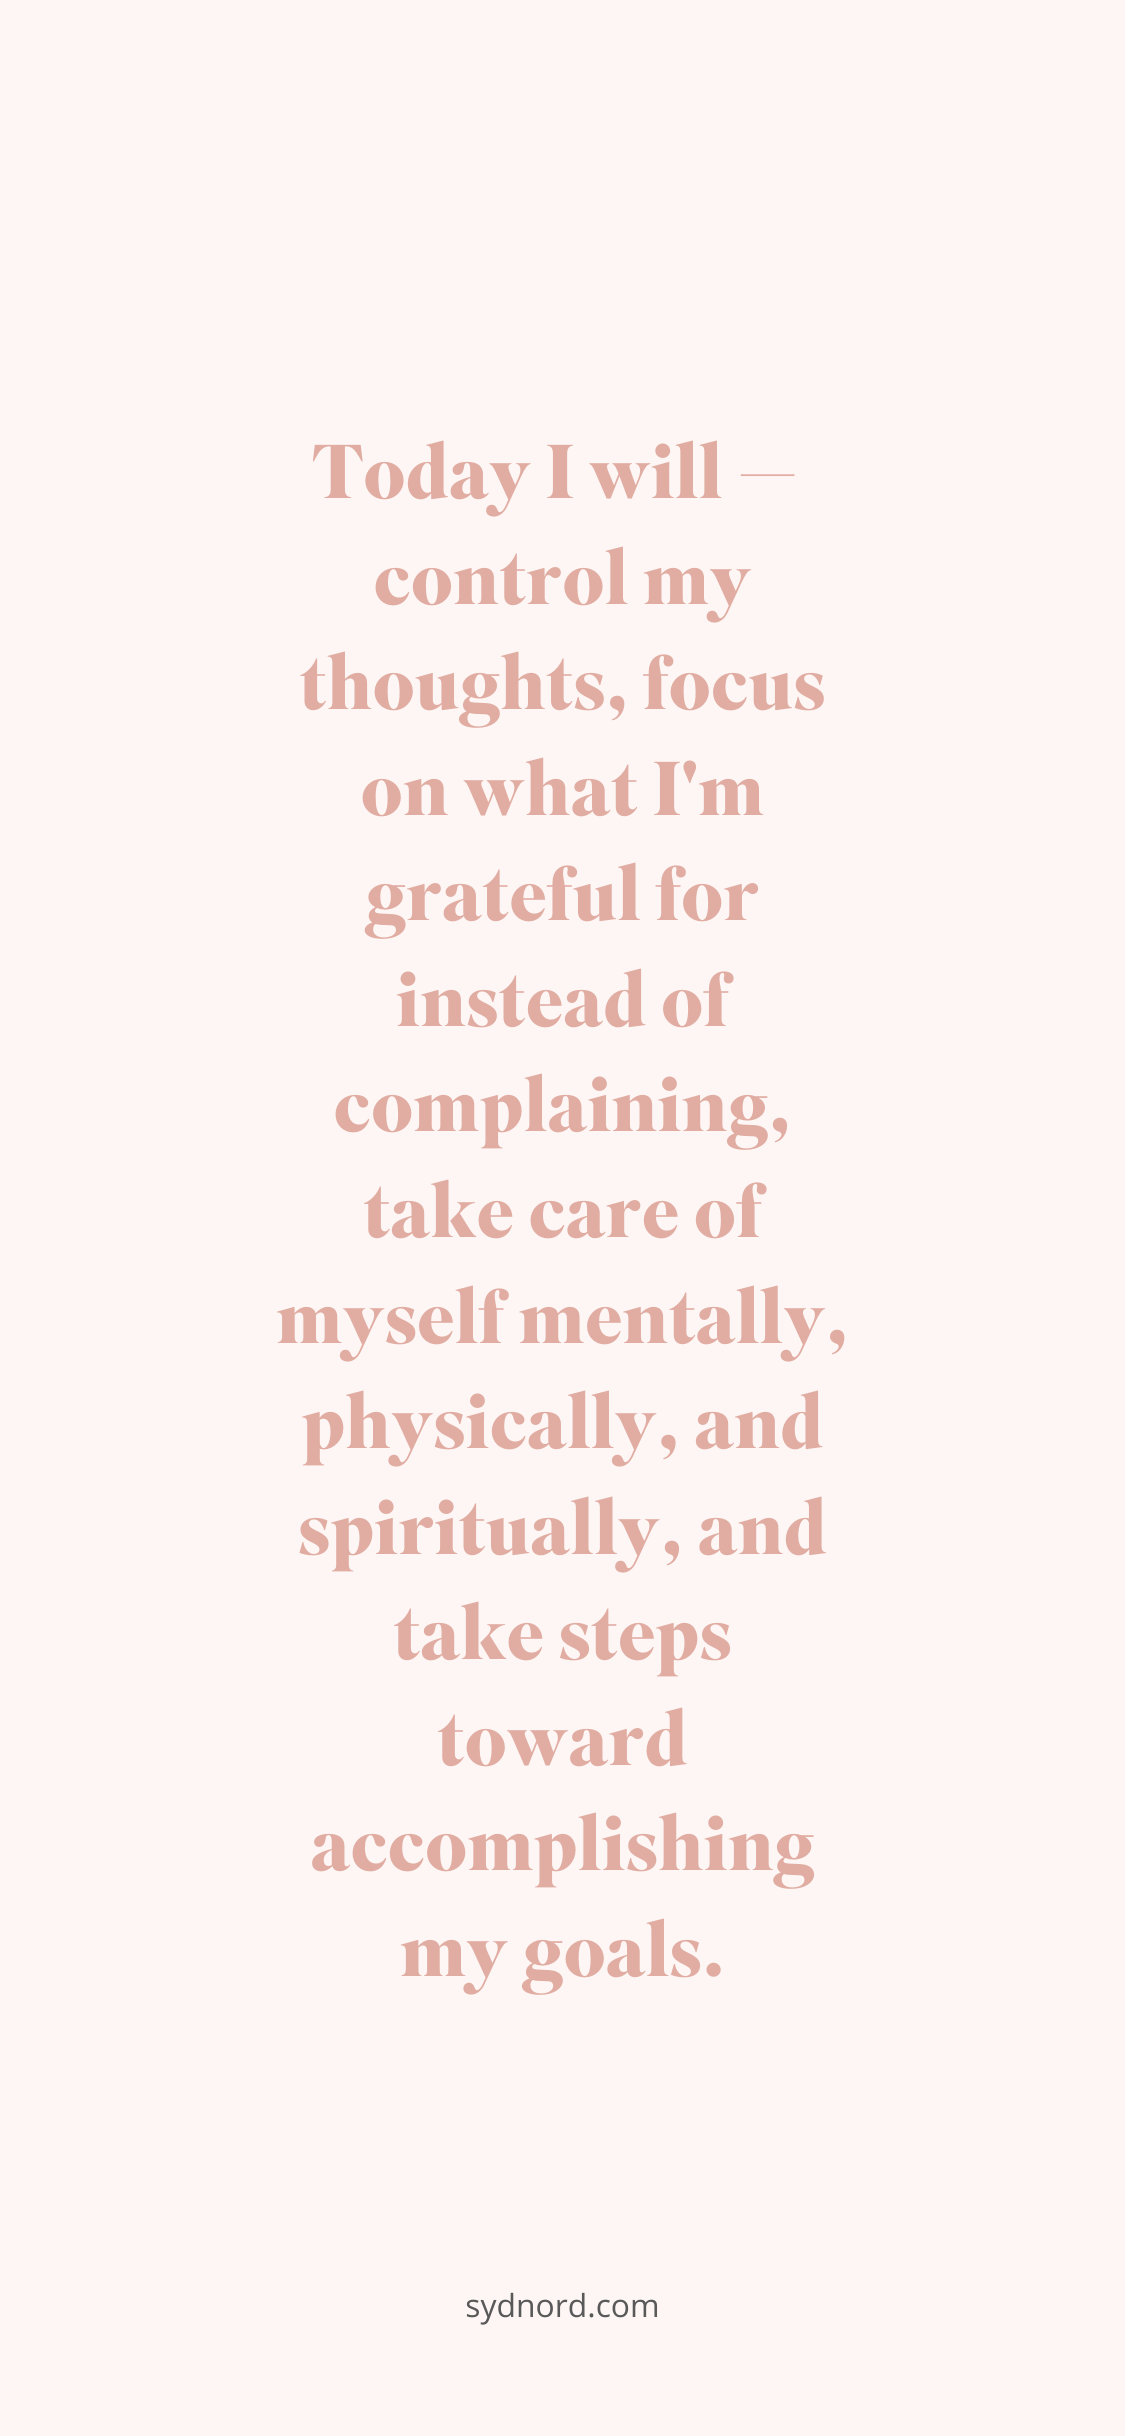 Today I will — control my thoughts, focus on what I'm grateful for instead of complaining, take care of myself mentally, physically, and spiritually, and take steps toward accomplishing my goals. Positive quote goals!